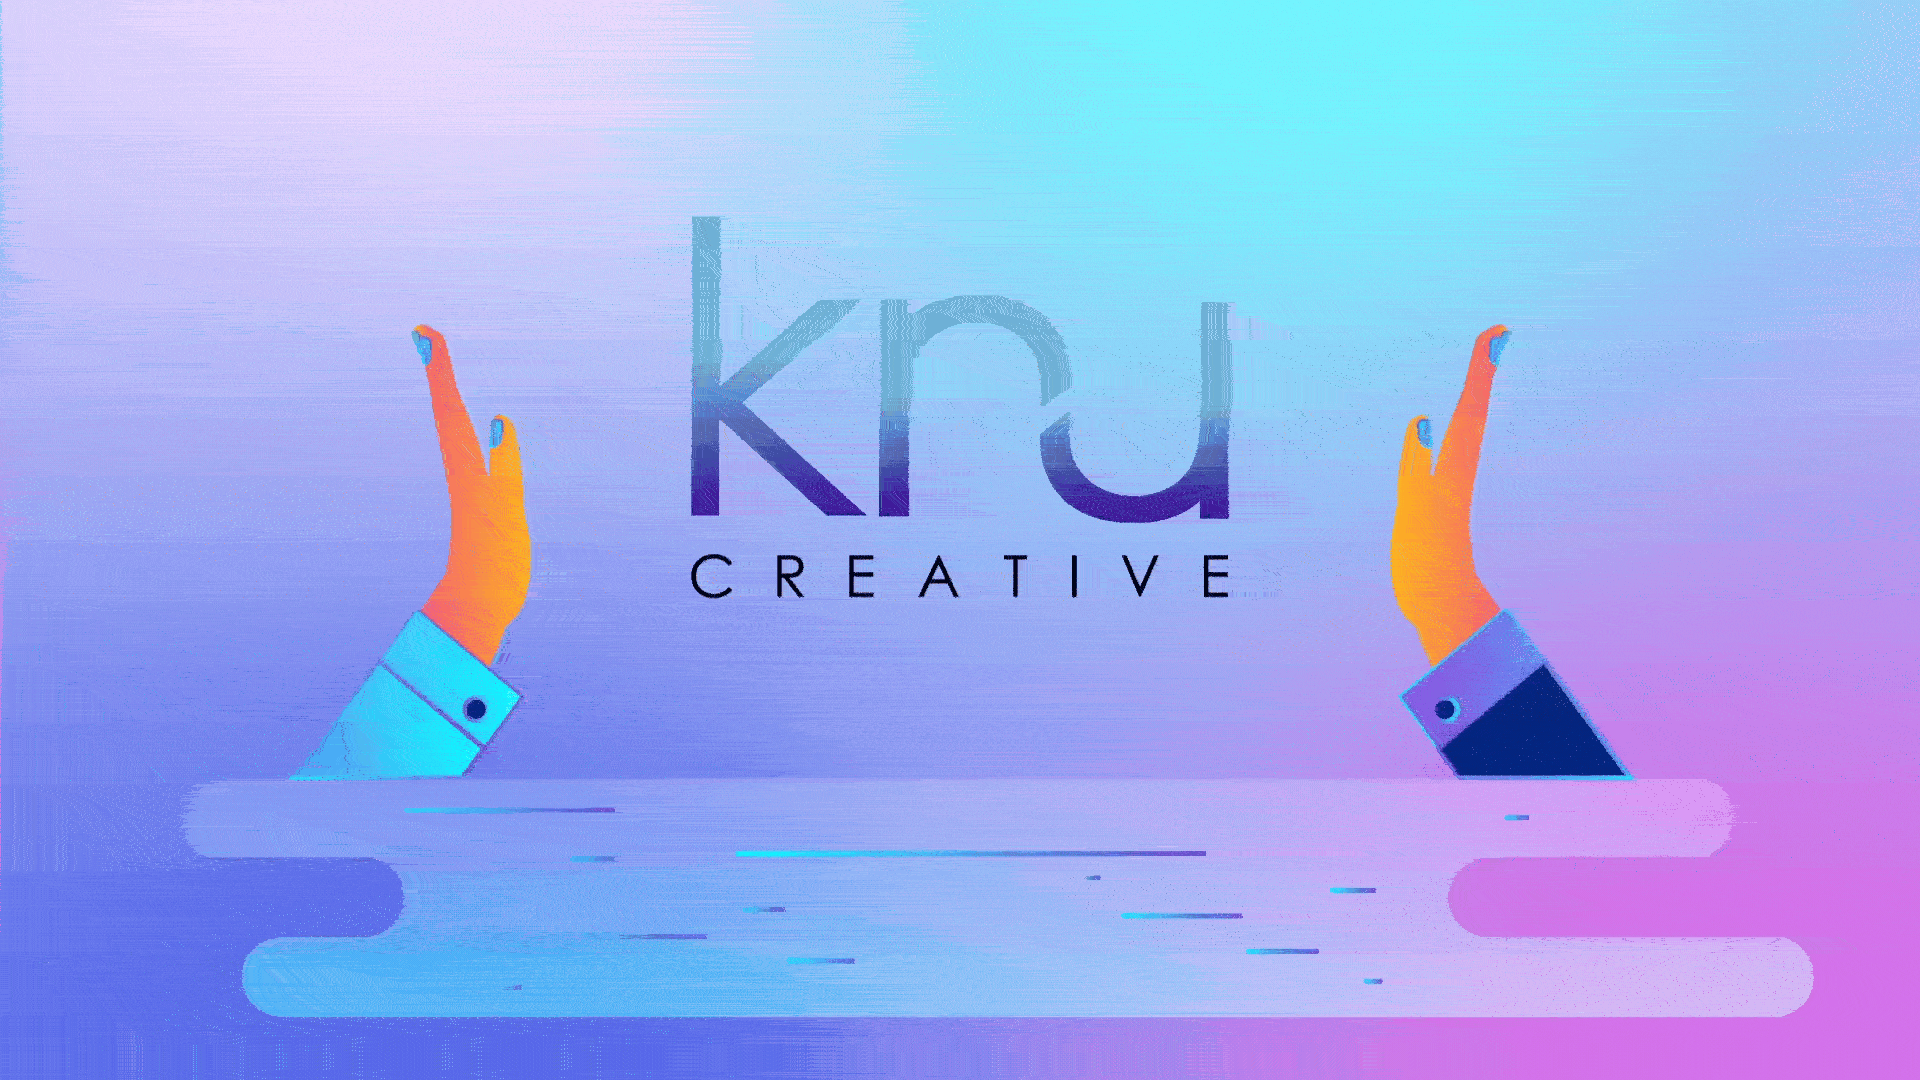 Consulting image for Kru creative.